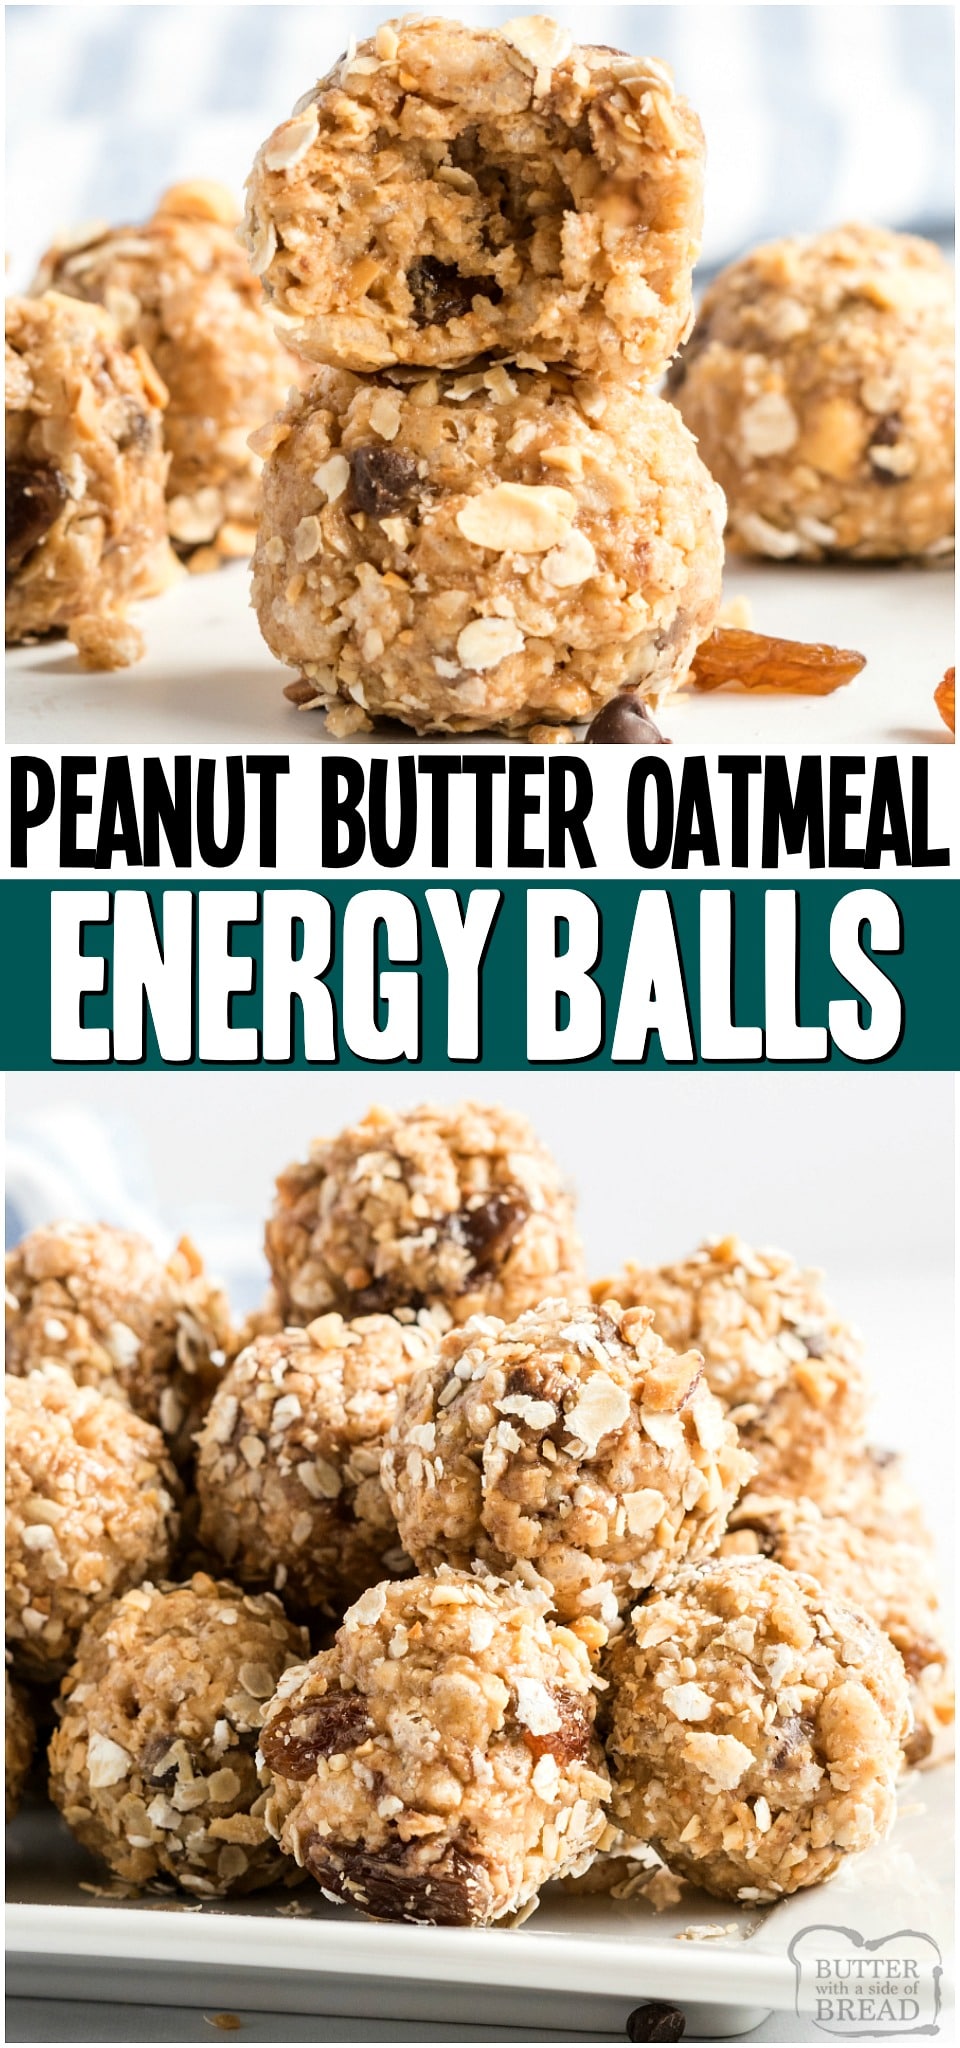 Peanut Butter Oatmeal Balls are a simple, no-bake recipe with peanut butter, oatmeal, honey, raisins and chocolate chips. Perfect homemade energy bites for breakfast, lunch or snack that everyone loves! 